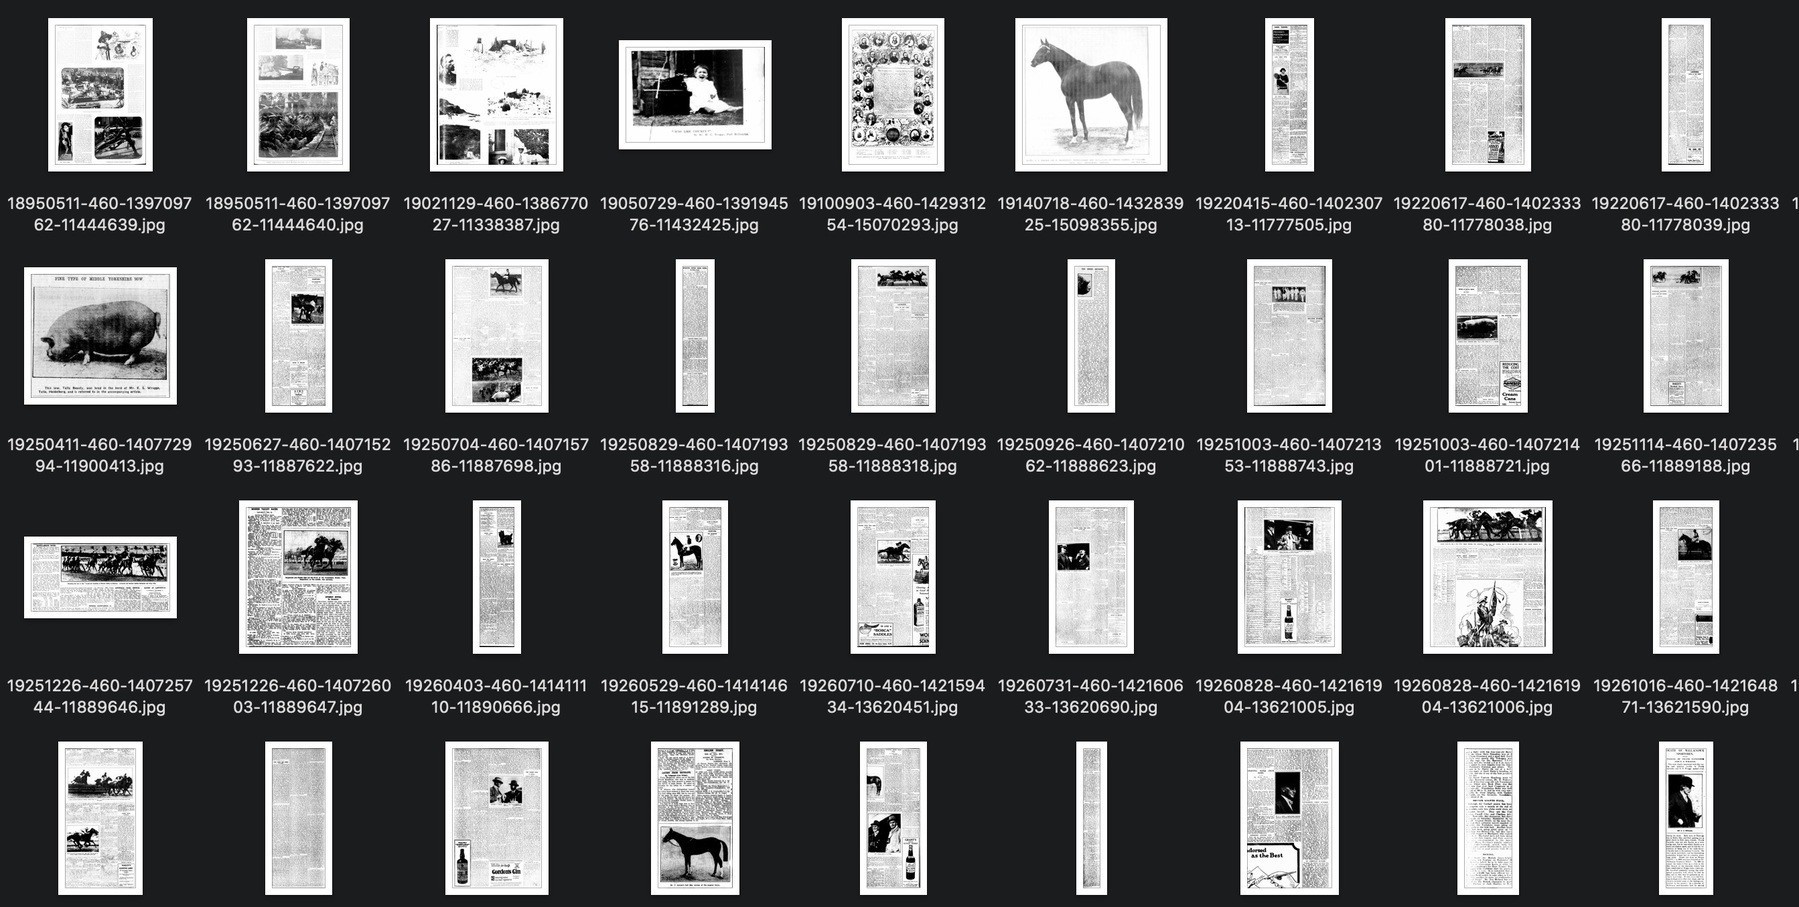 Thumbnails of newspaper articles saved as images